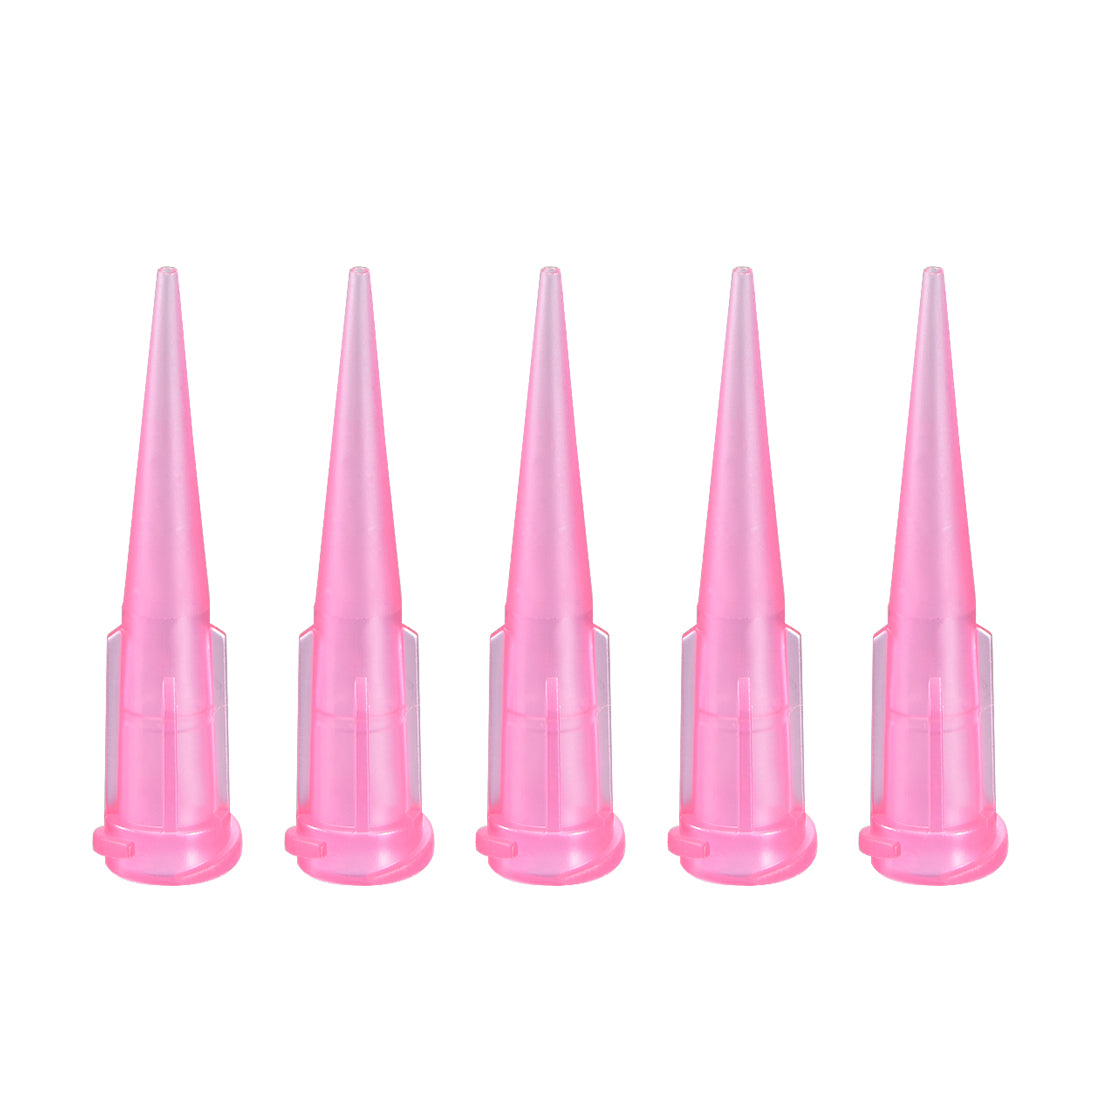 uxcell Uxcell Industrial Blunt Tip Tapered Dispensing Fill Needle 20ga X 1.26" Pink 5pcs